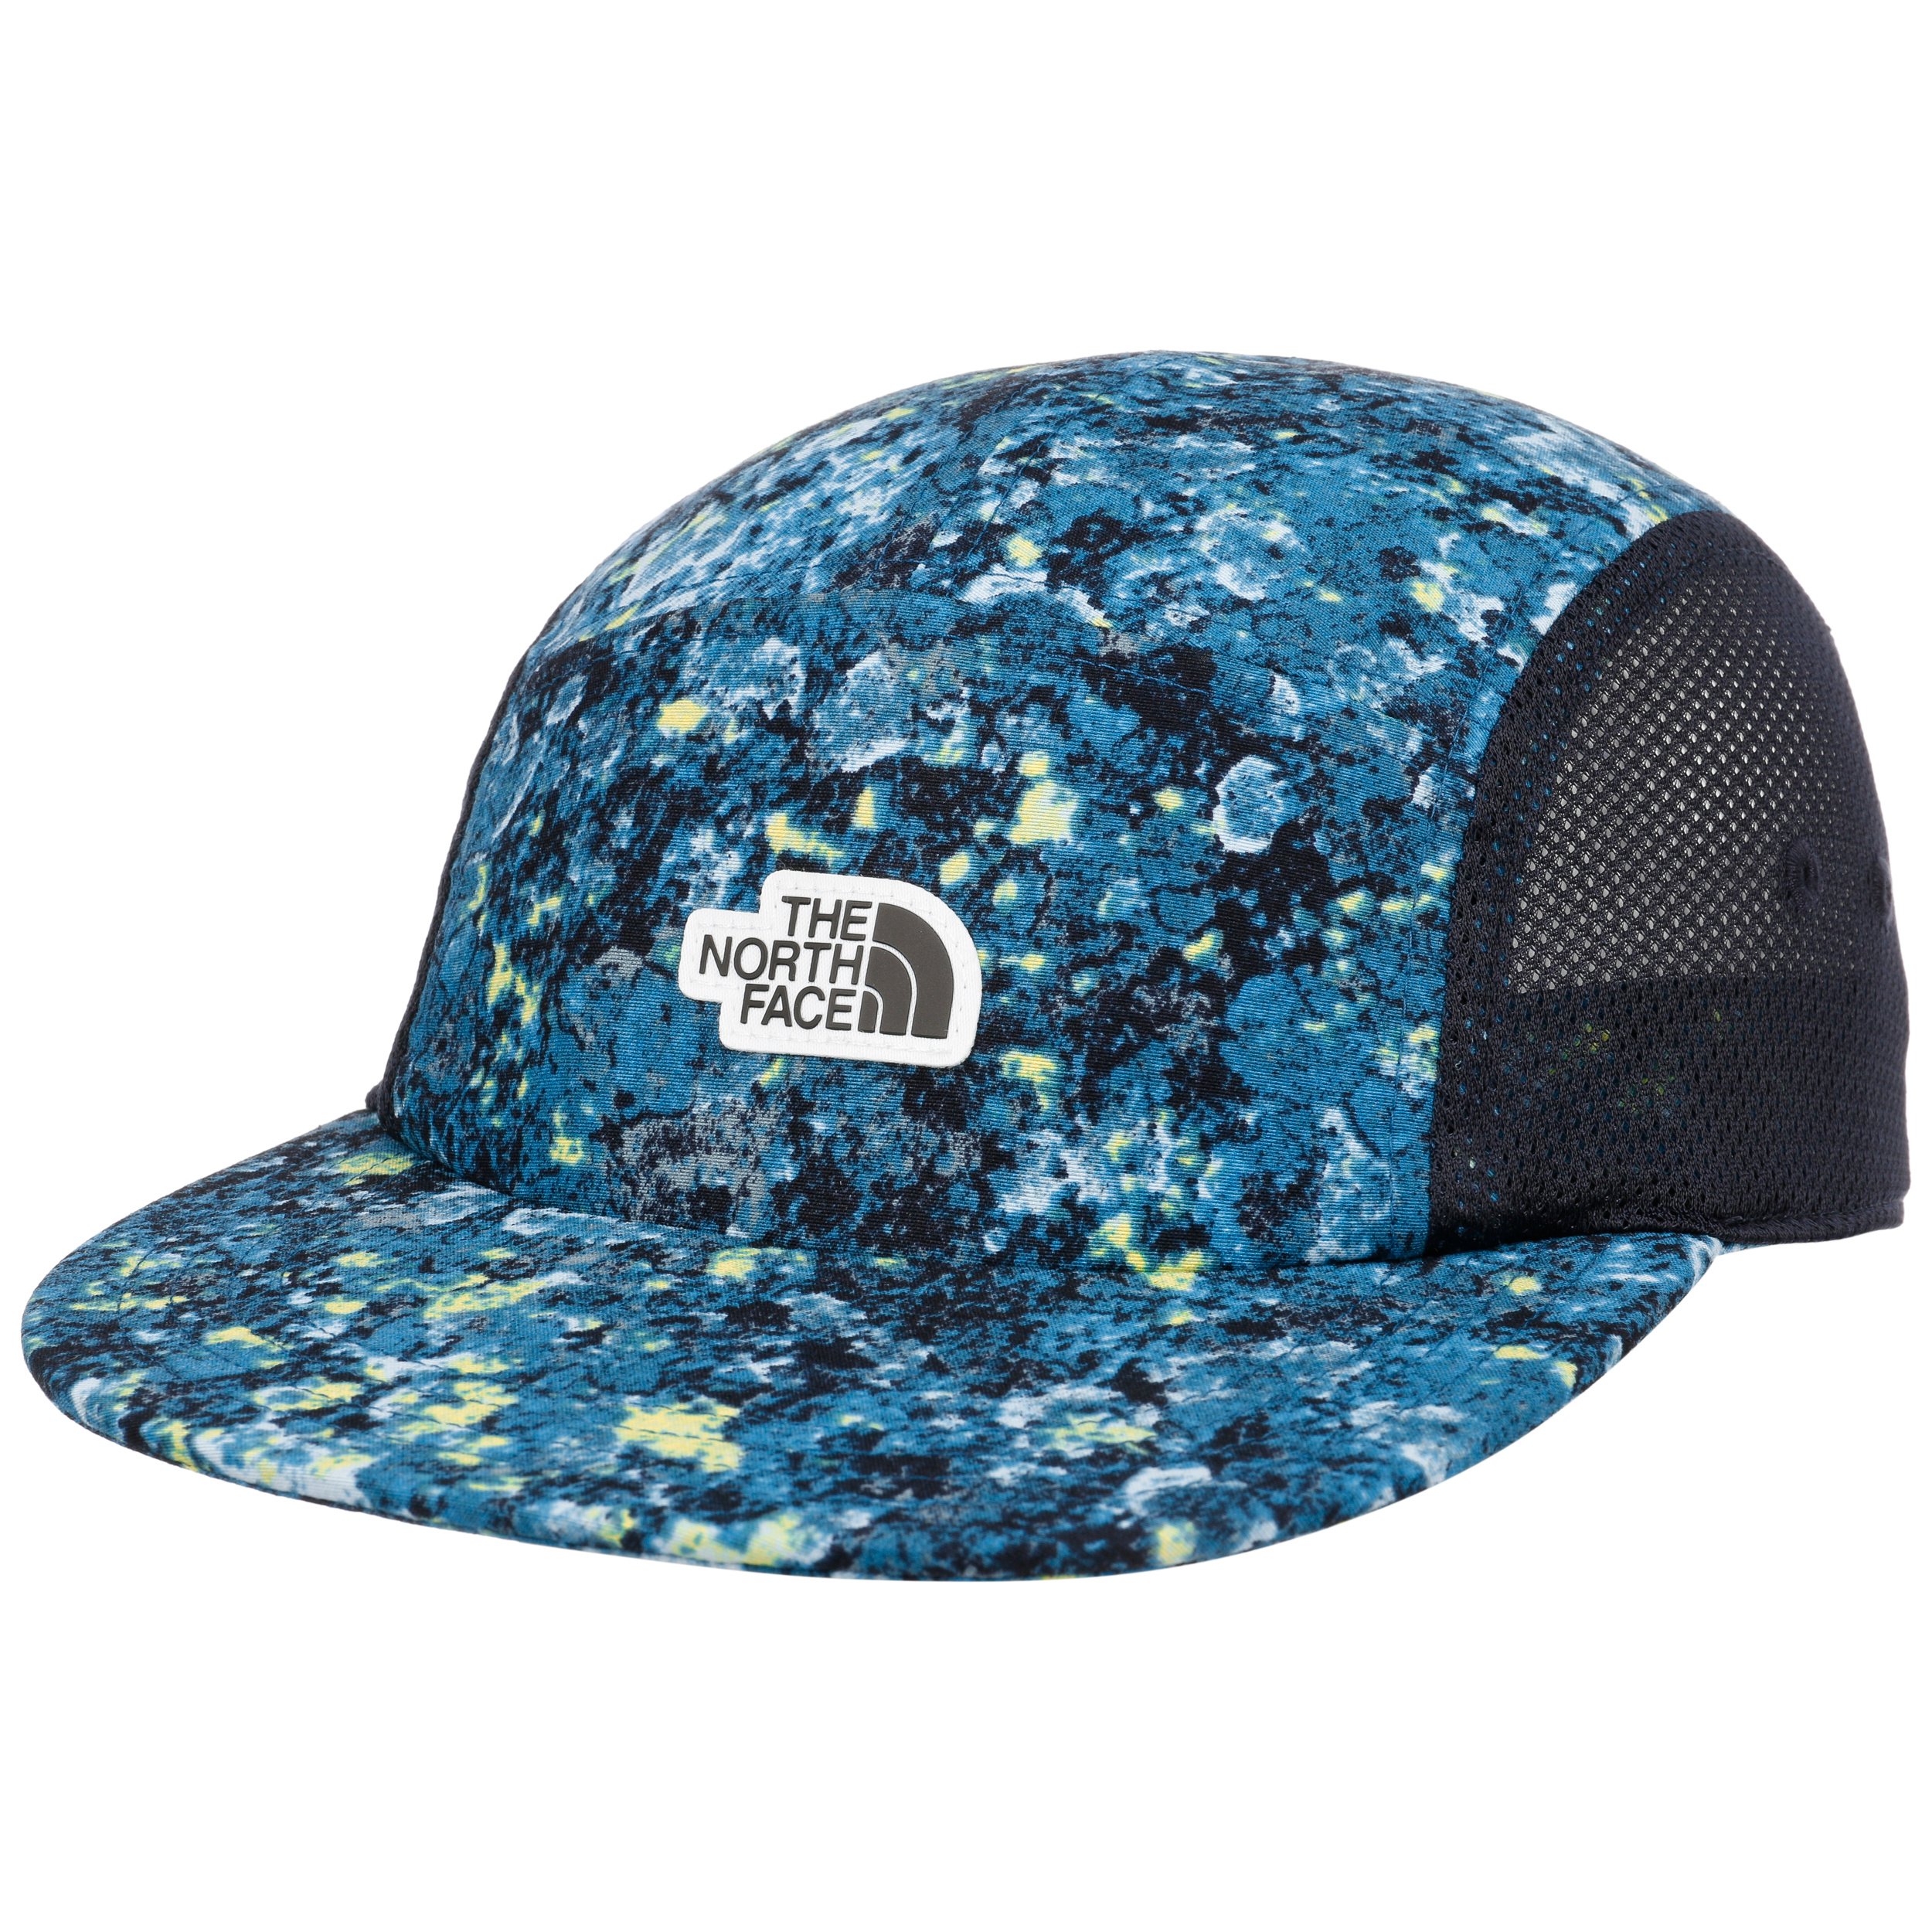 Een zekere Naleving van Beroemdheid Casquette Class V Camp by The North Face - 41,95 CHF